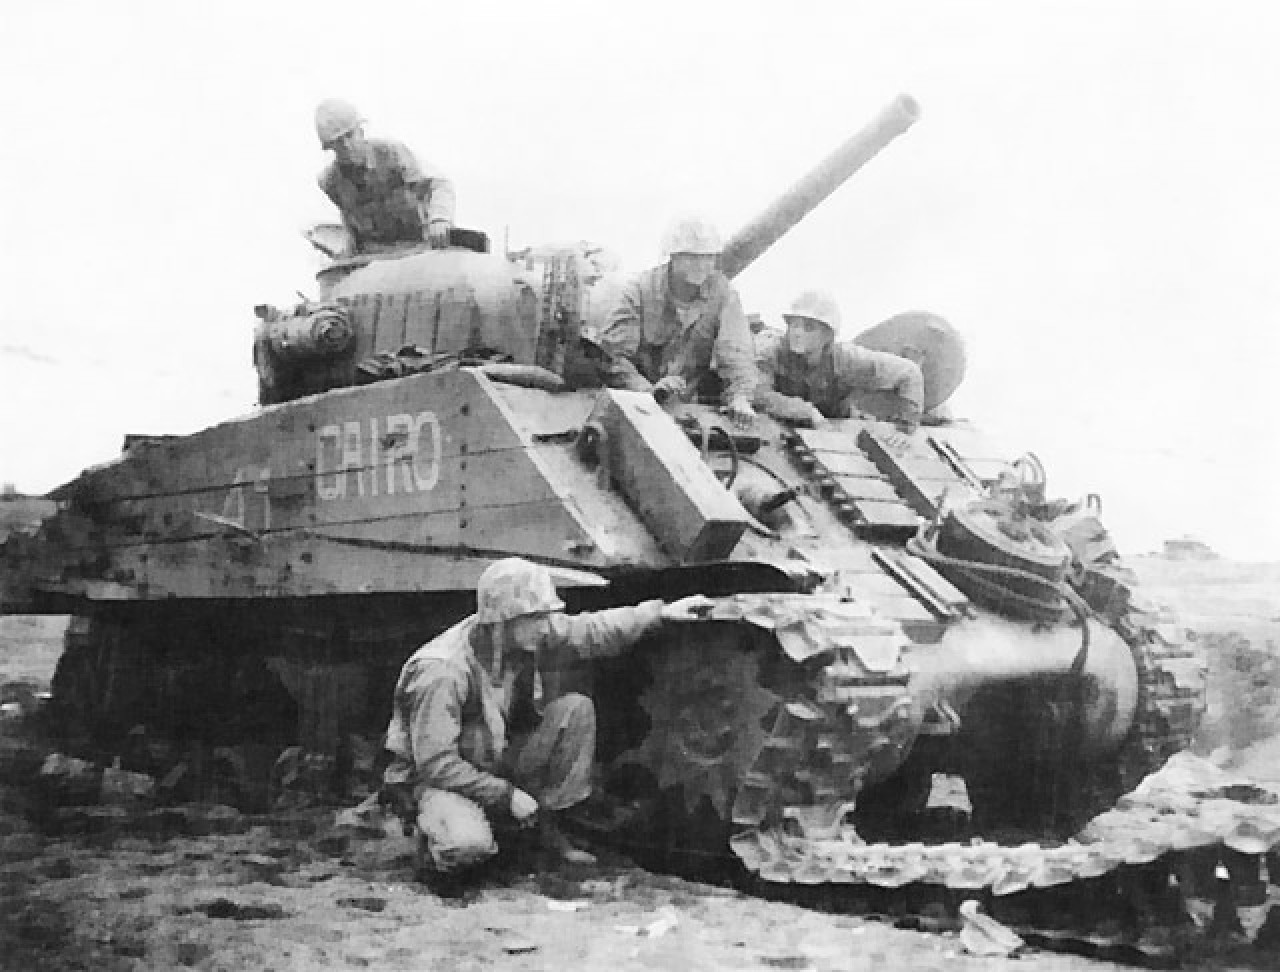 M4 Sherman 'Cairo' disabled by land mine, Iwo Jima, Japan, Feb 1945; note heavy wooden side planking meant to protect against magnetic demolition charges.